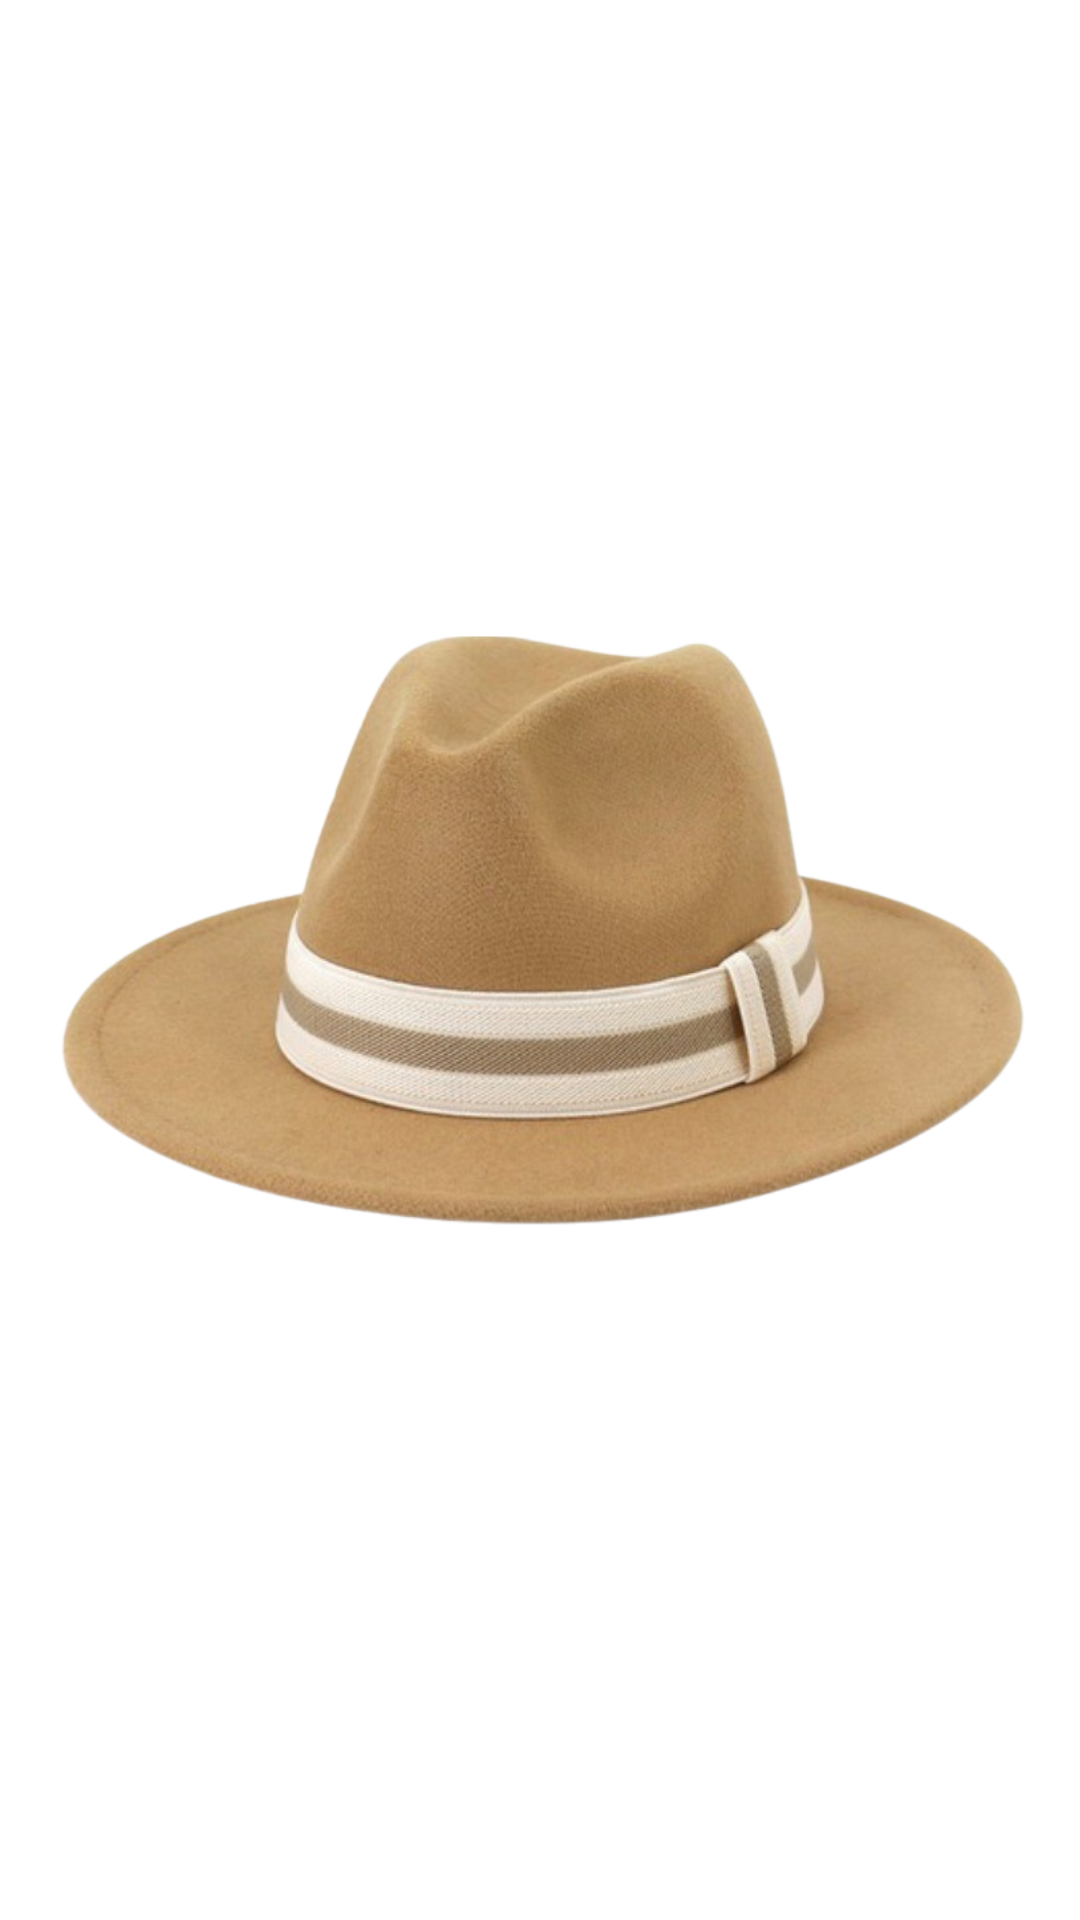 casual-fedora-hats-with-striped-stretch-belt-camel-ships-dec-6